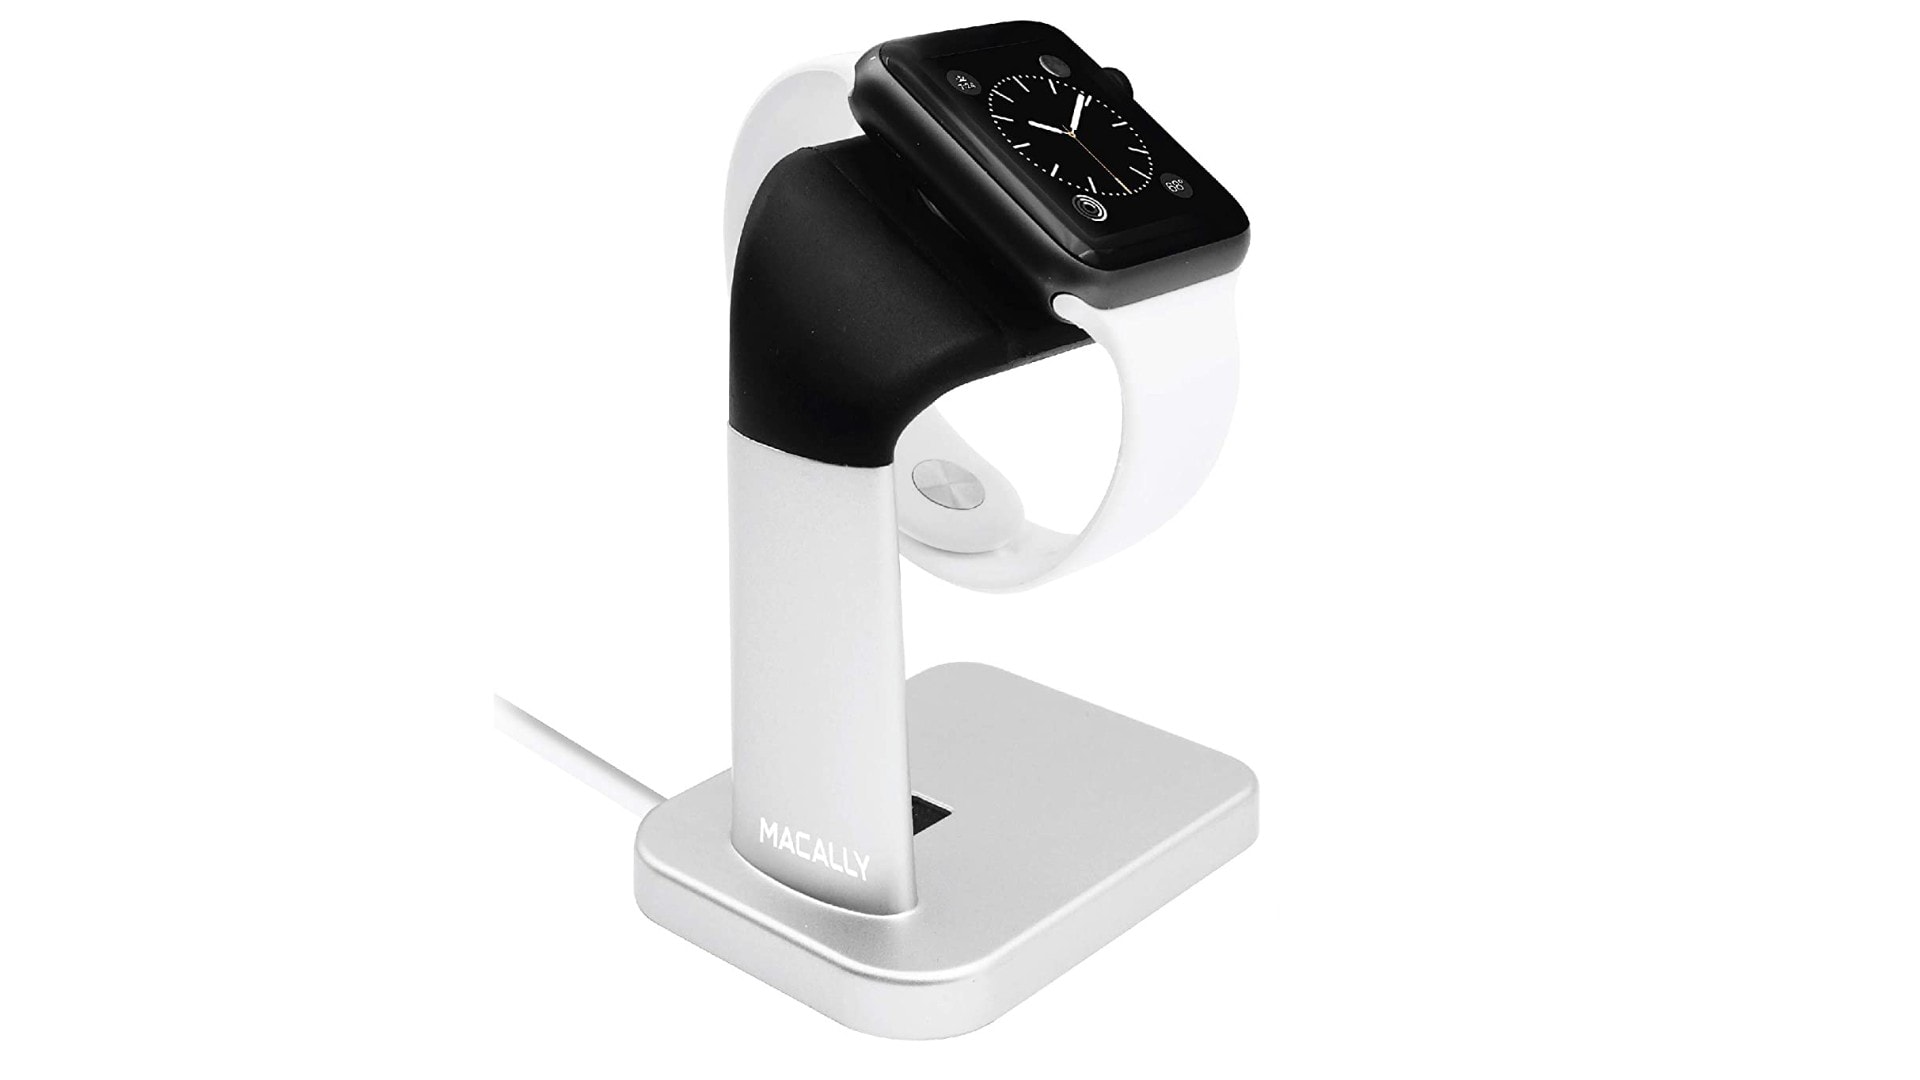 Macally Apple Watch stand